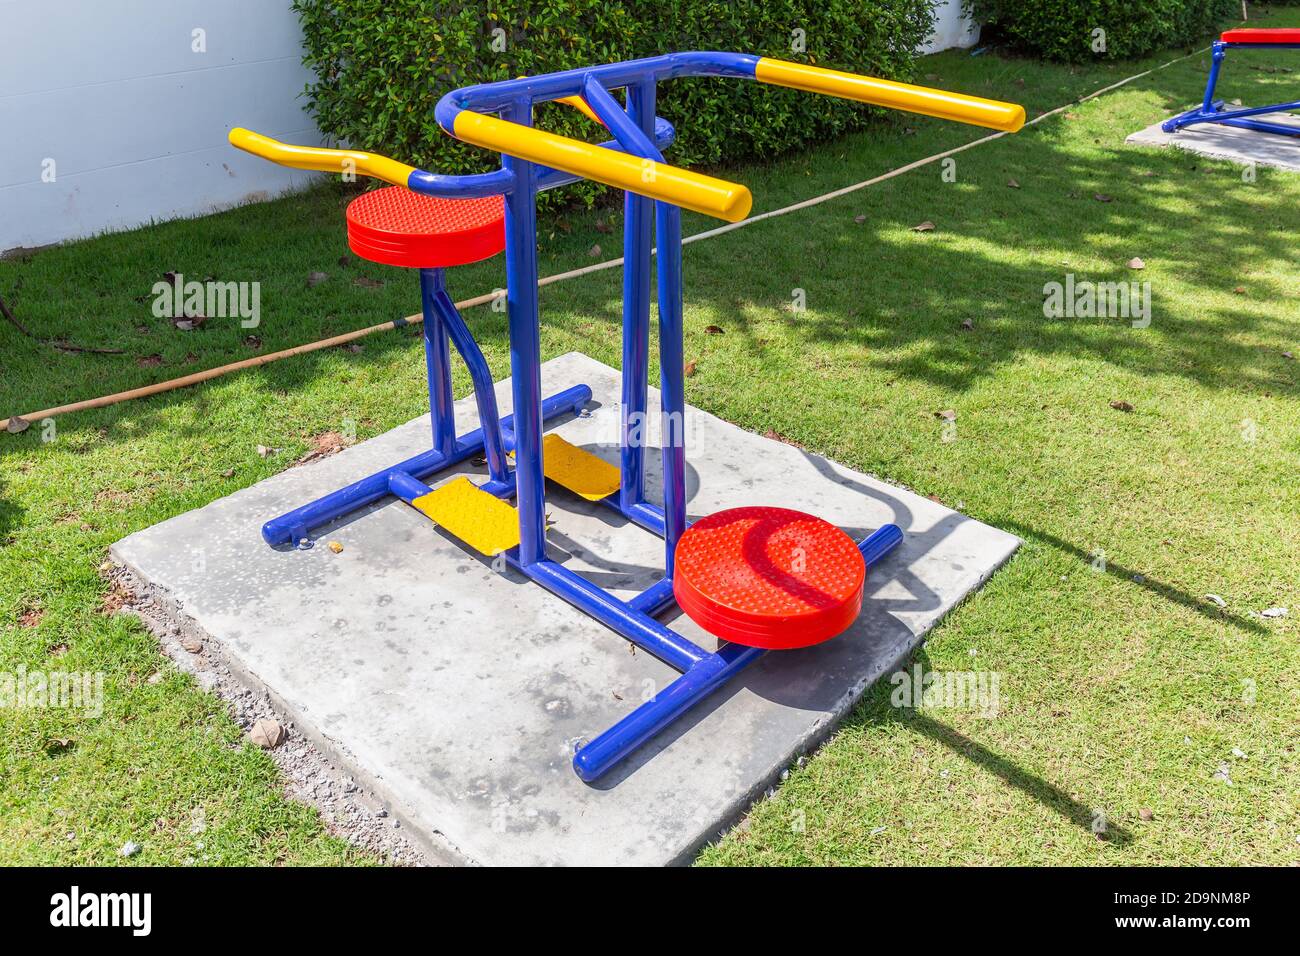 Colorful playground equipment and exercise at grass field outdoor public Stock Photo